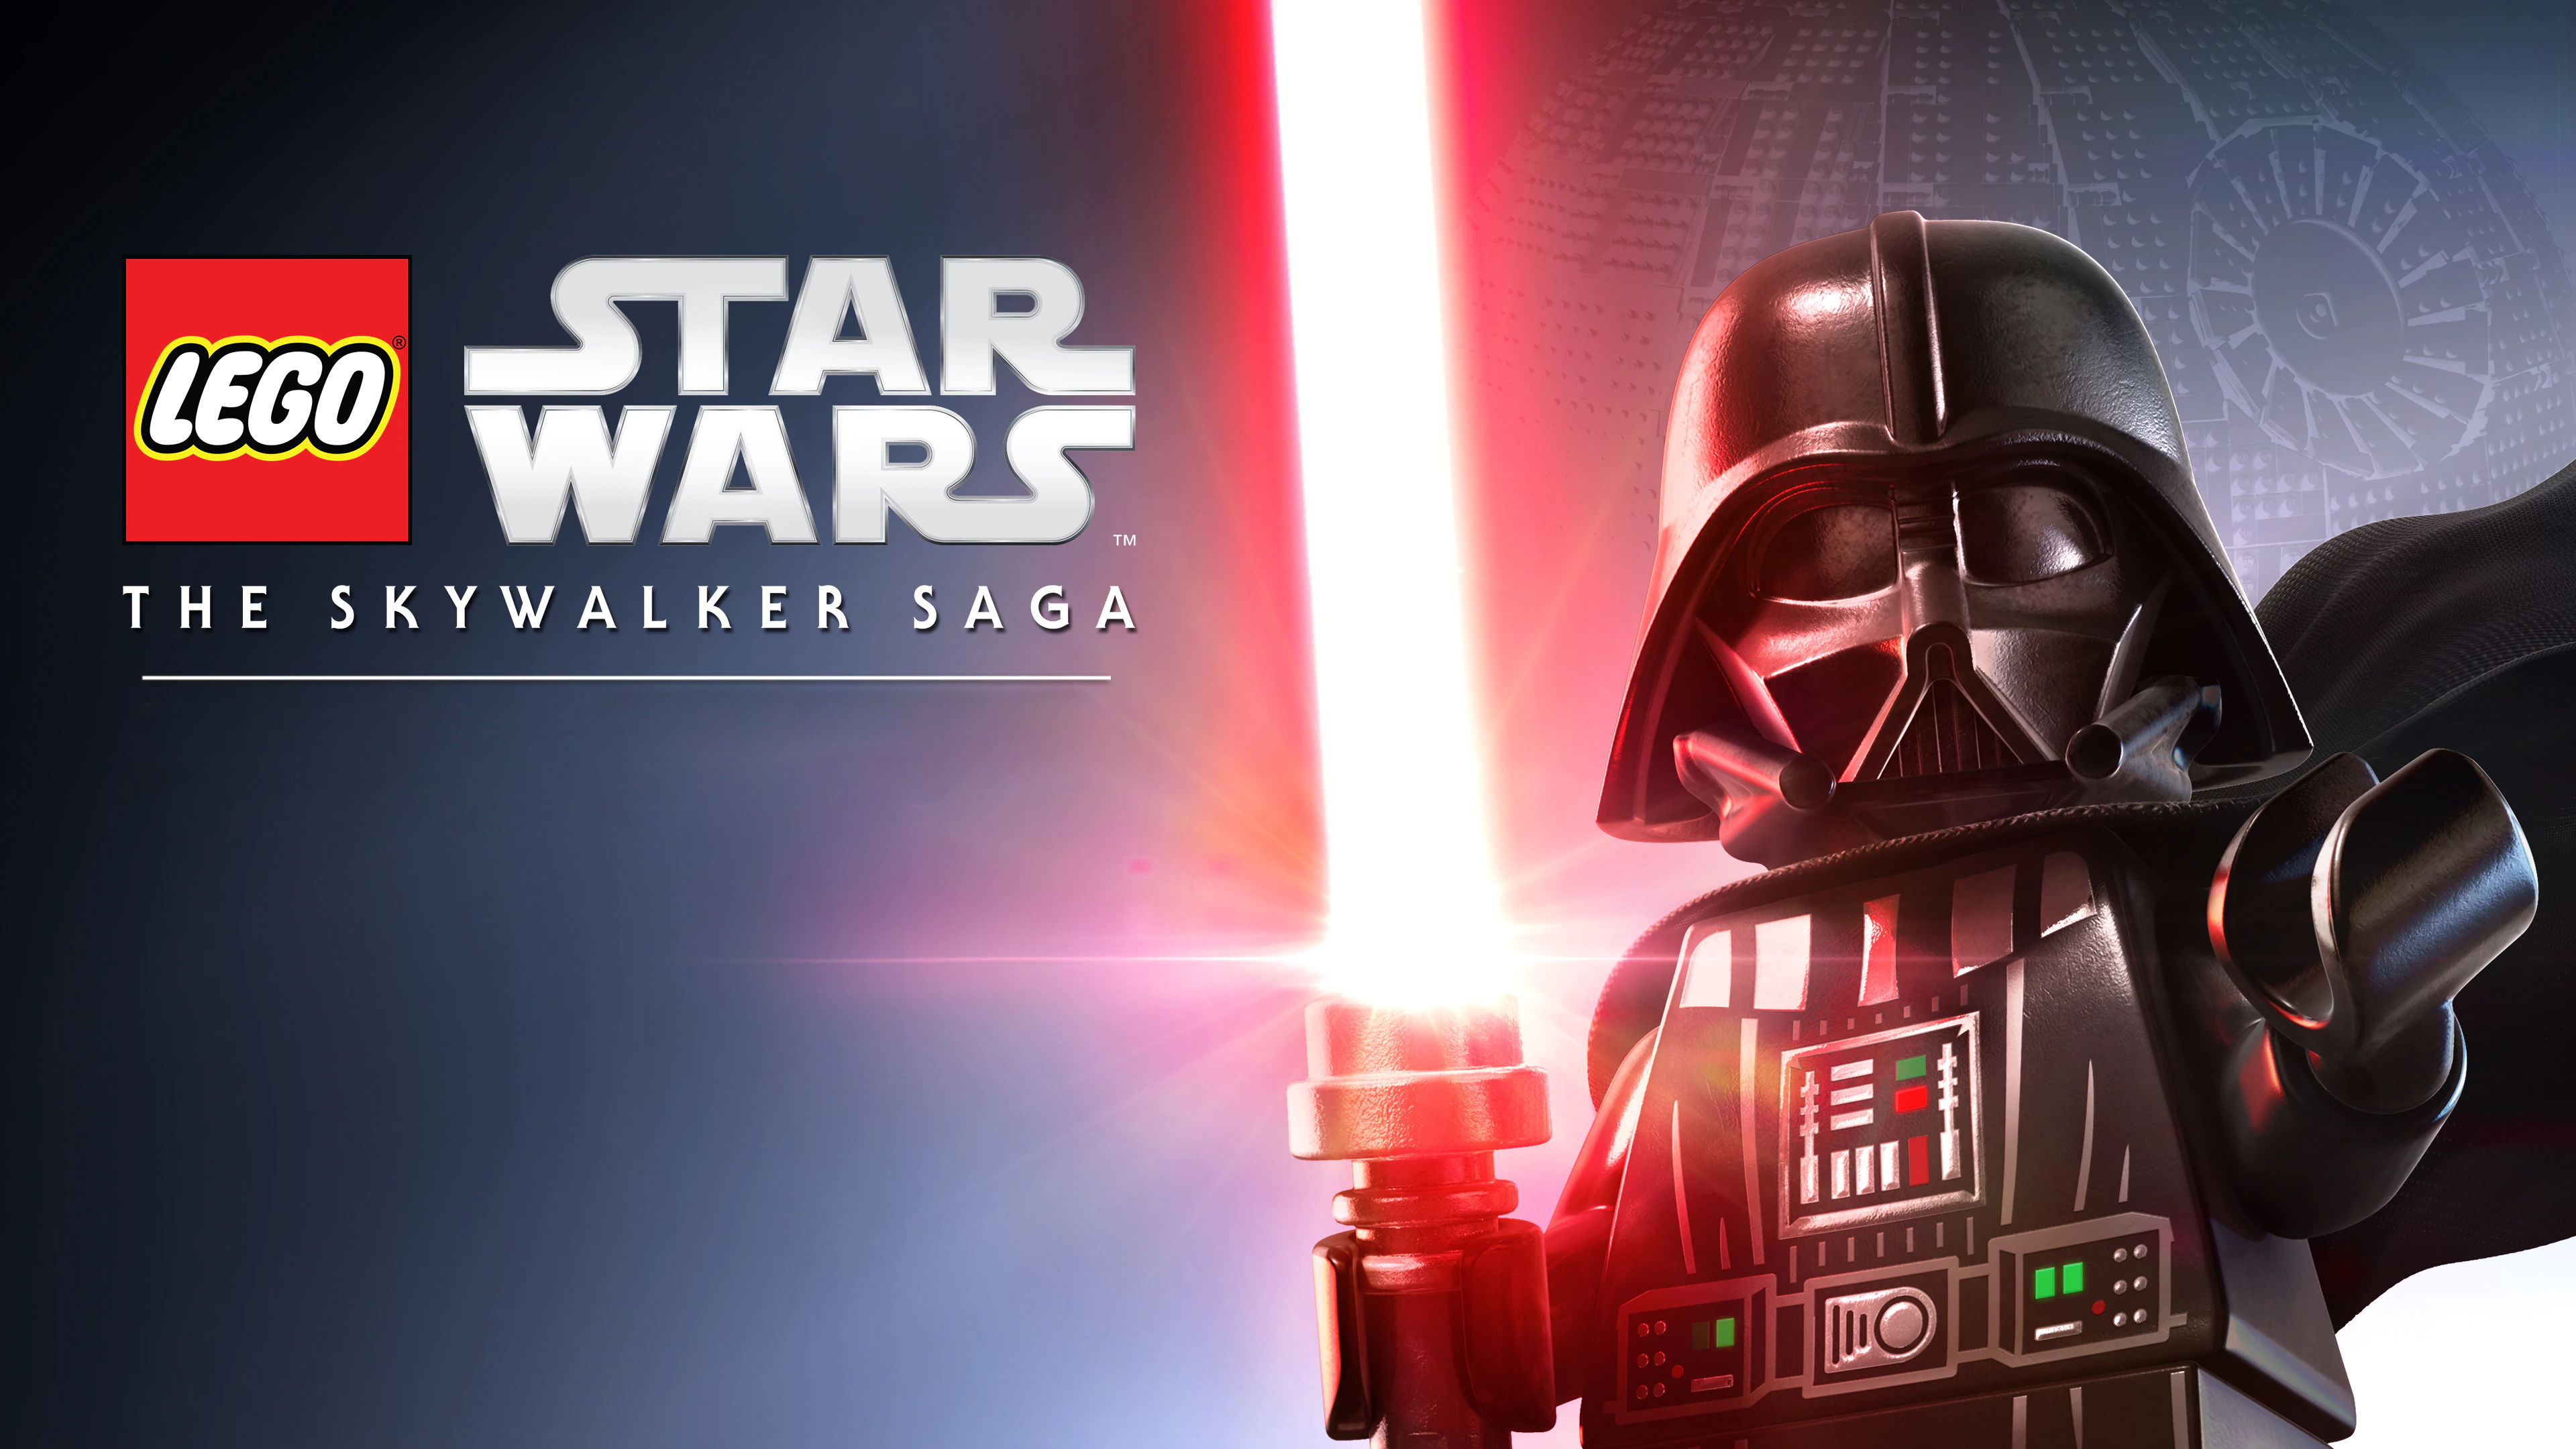 Star Wars universe, Iconic characters, LEGO-inspired gameplay, Action-packed, 3840x2160 4K Desktop